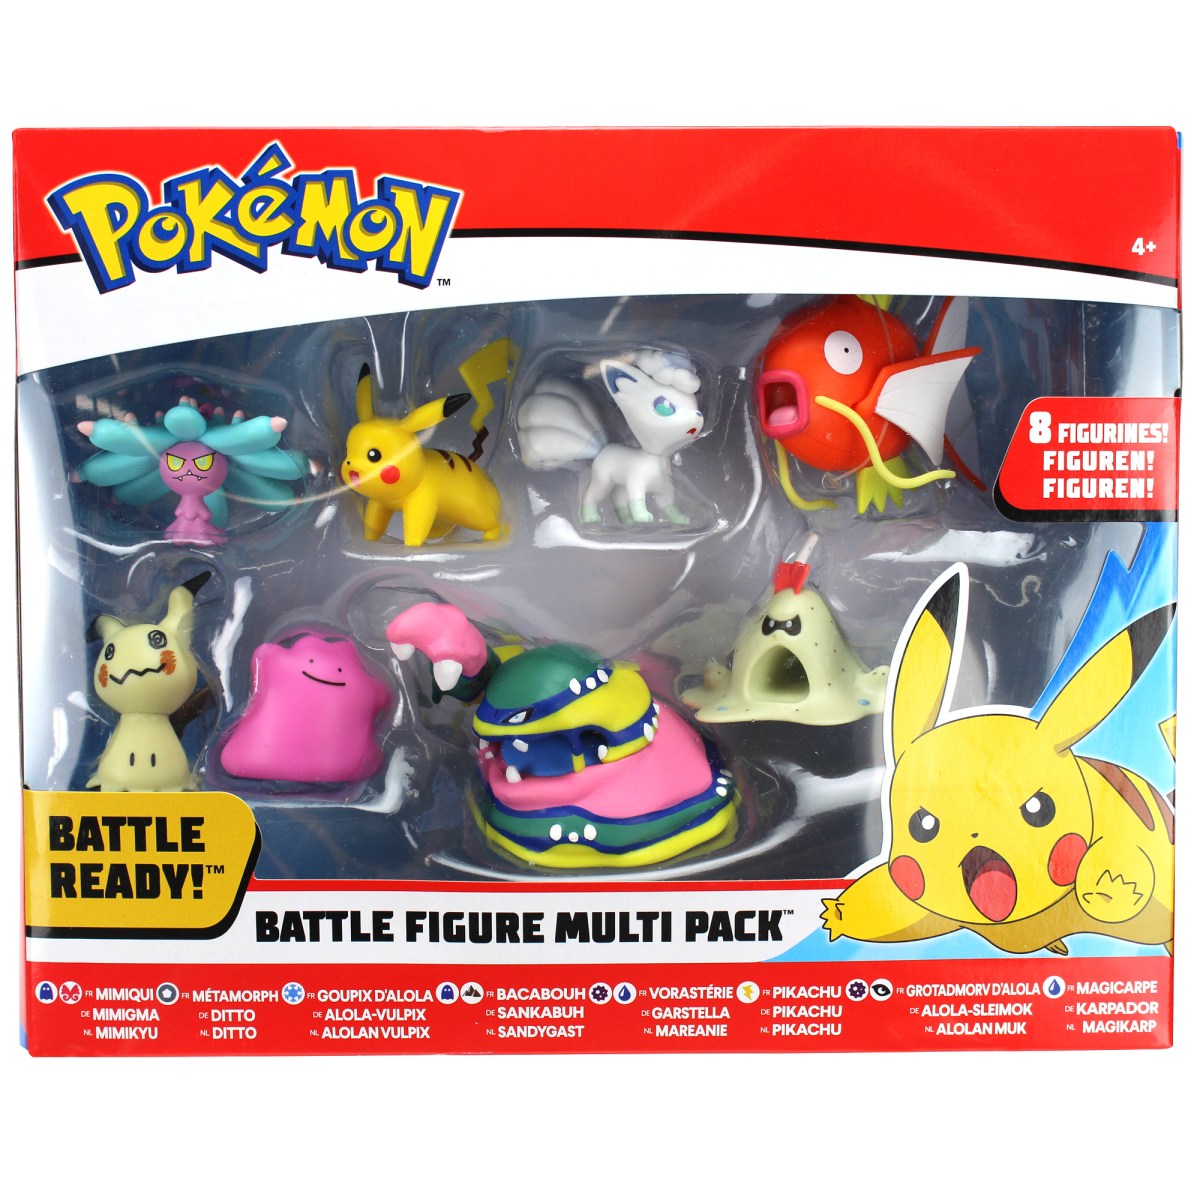 Picture of the Pokemon Multi-Pack